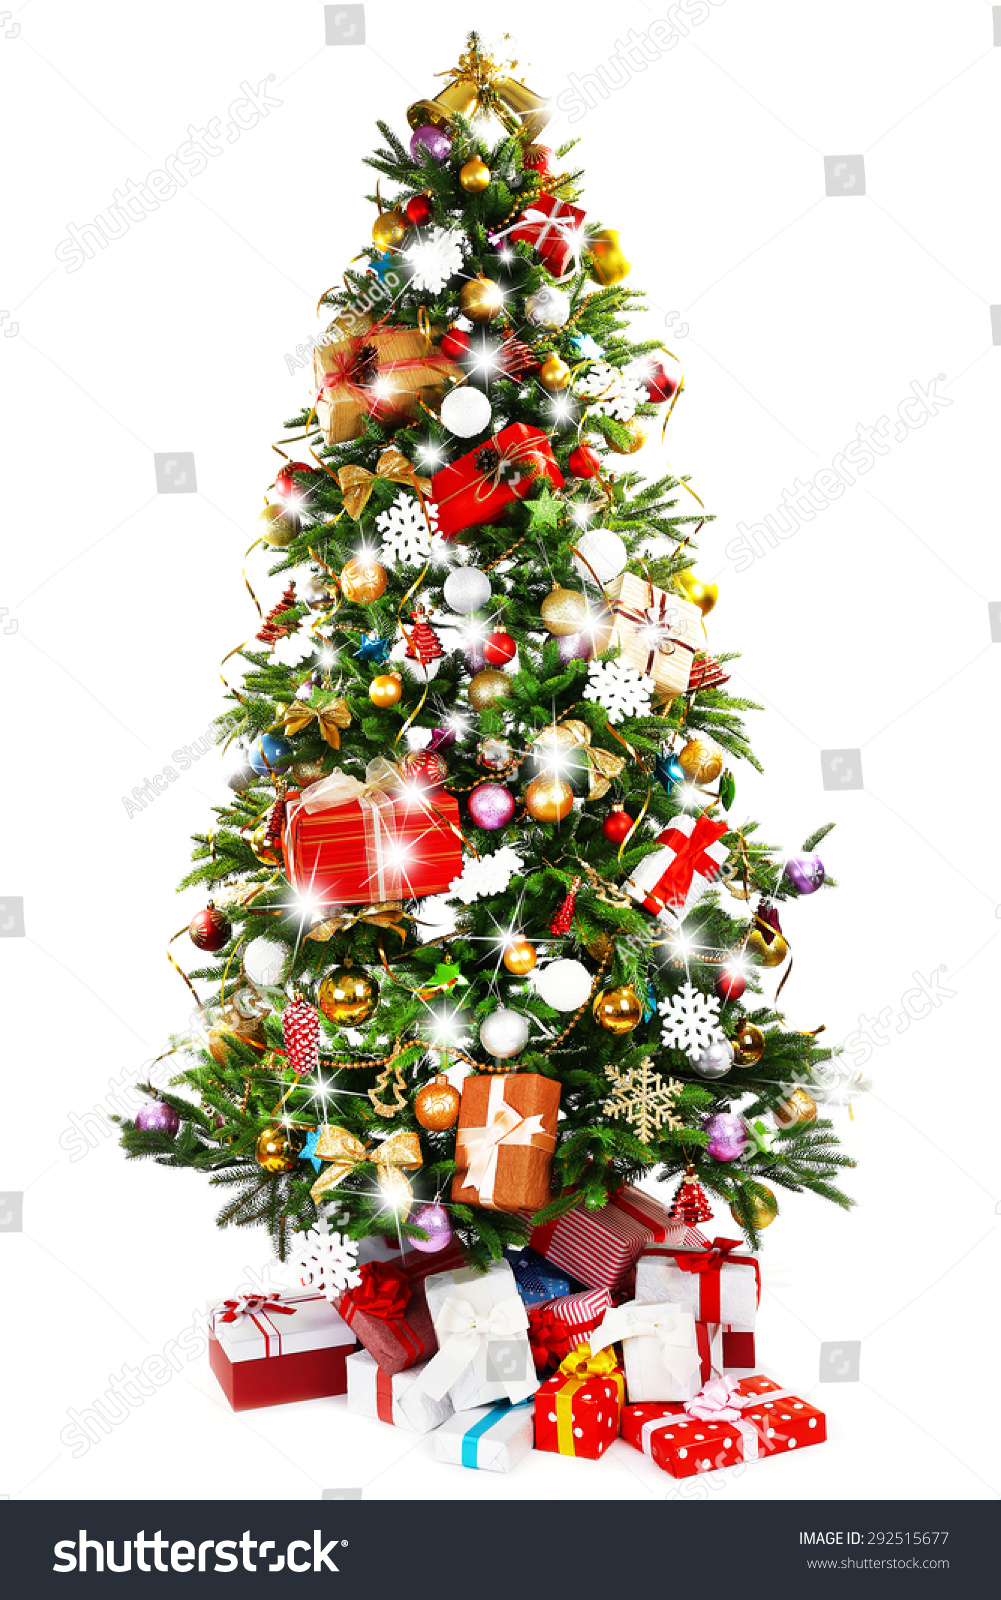 Christmas Tree And Presents Isolated On White Stock Photo 292515677 ...